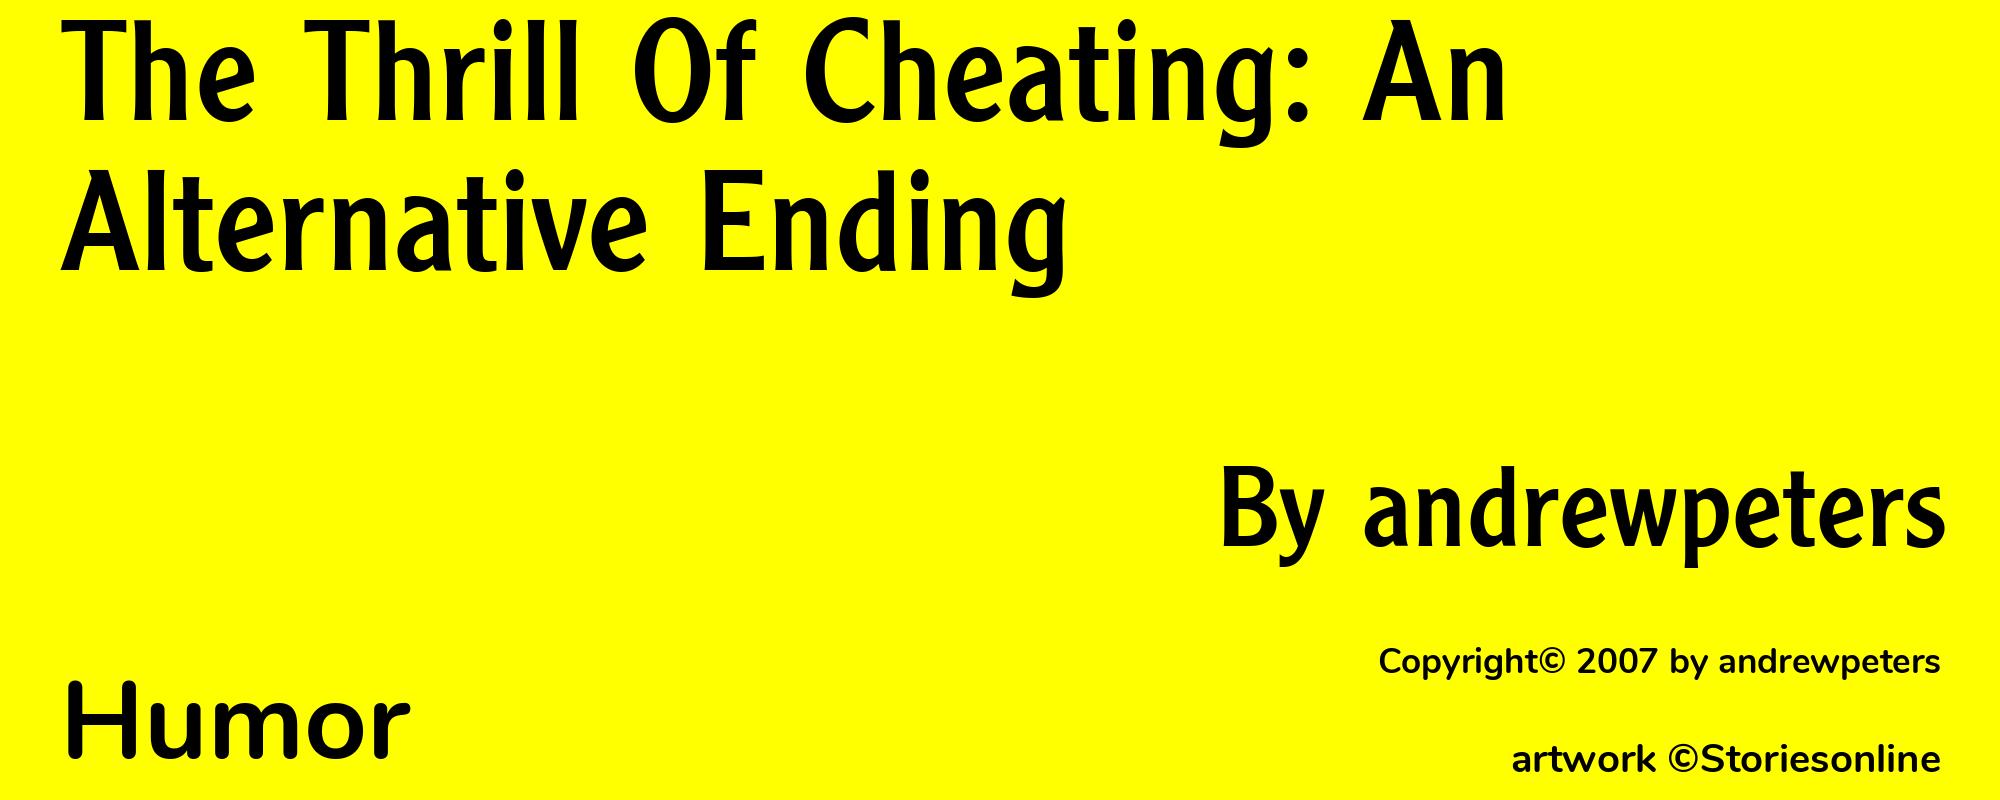 The Thrill Of Cheating: An Alternative Ending - Cover